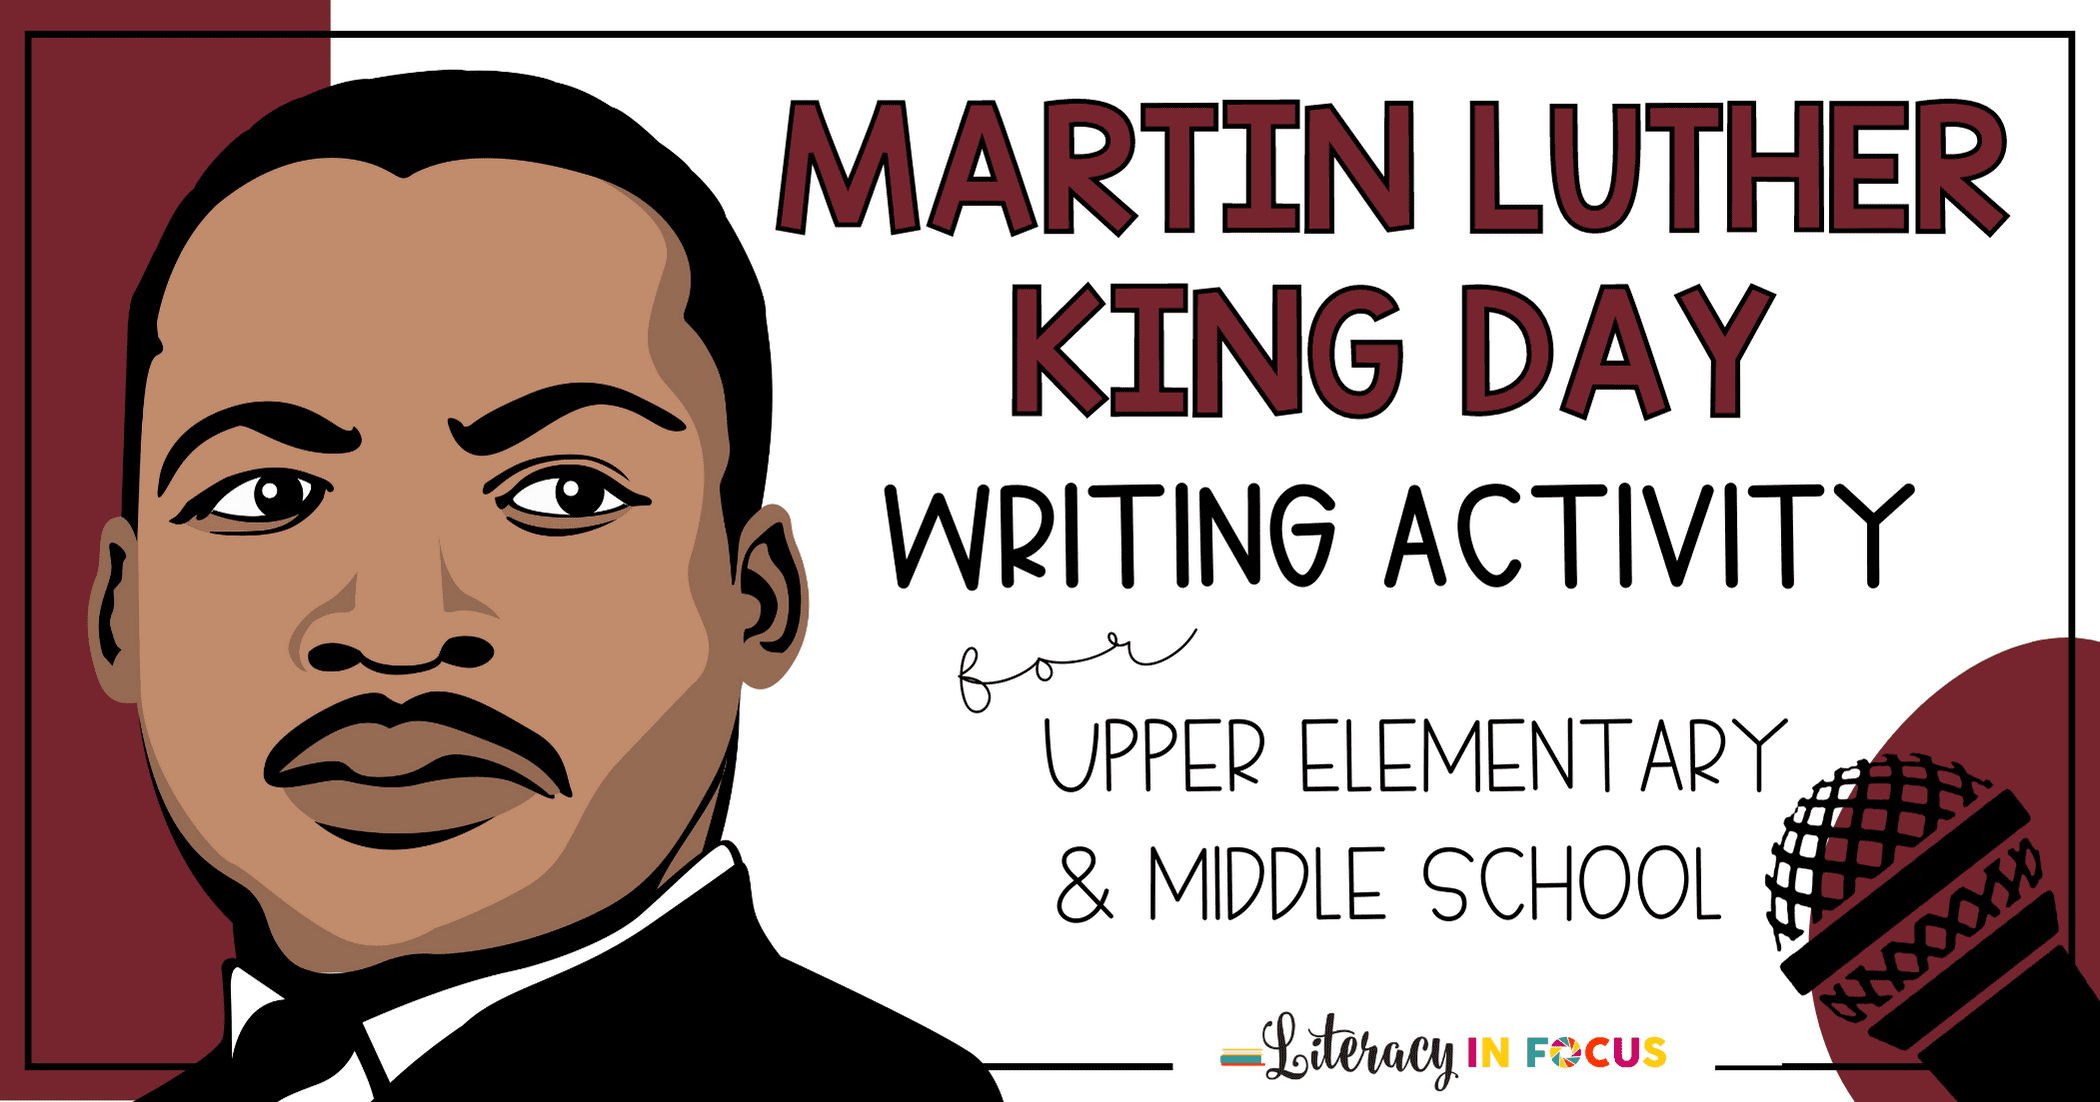 Martin Luther King Day Writing Activity